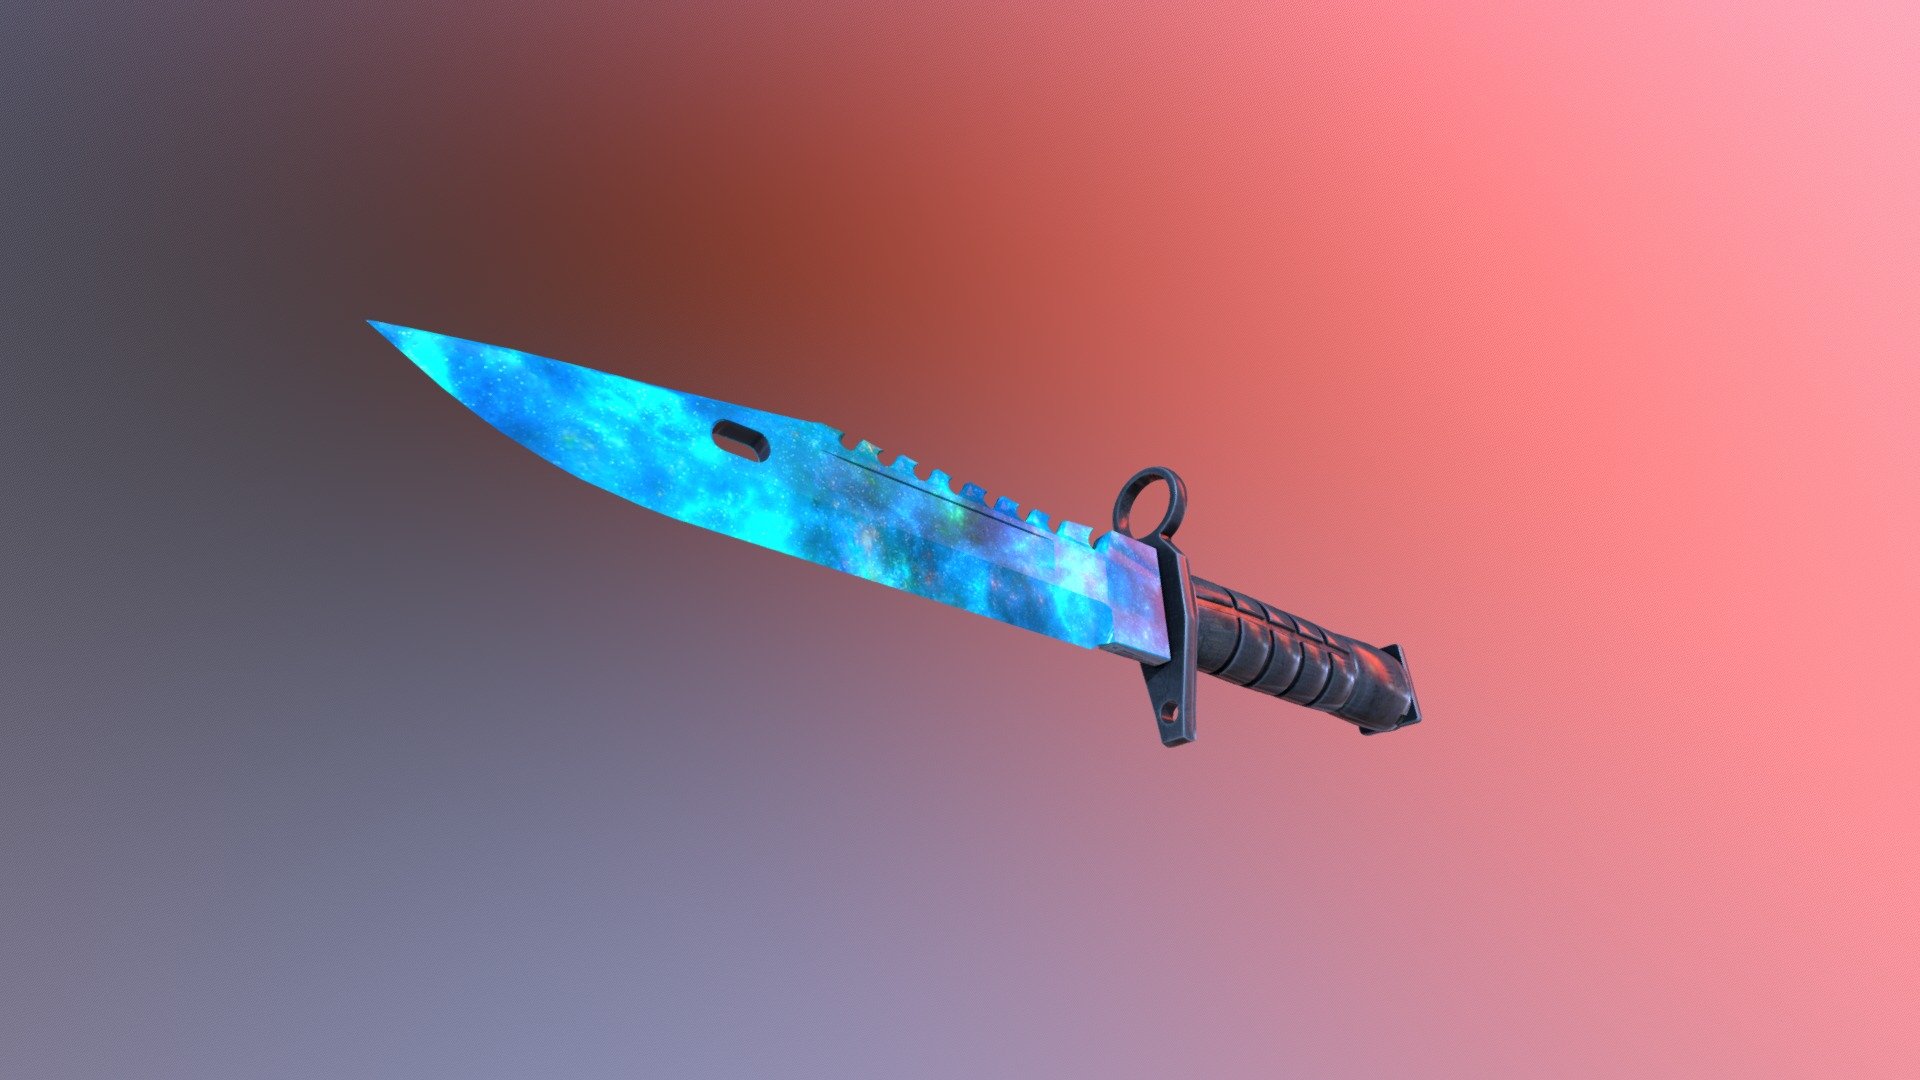 A premium VGO Knife skin. Intended to have a higher price tag. Only for the big ballers ;D - M9 Bayonet Nebula - 3D model by cryptodelta 3d model